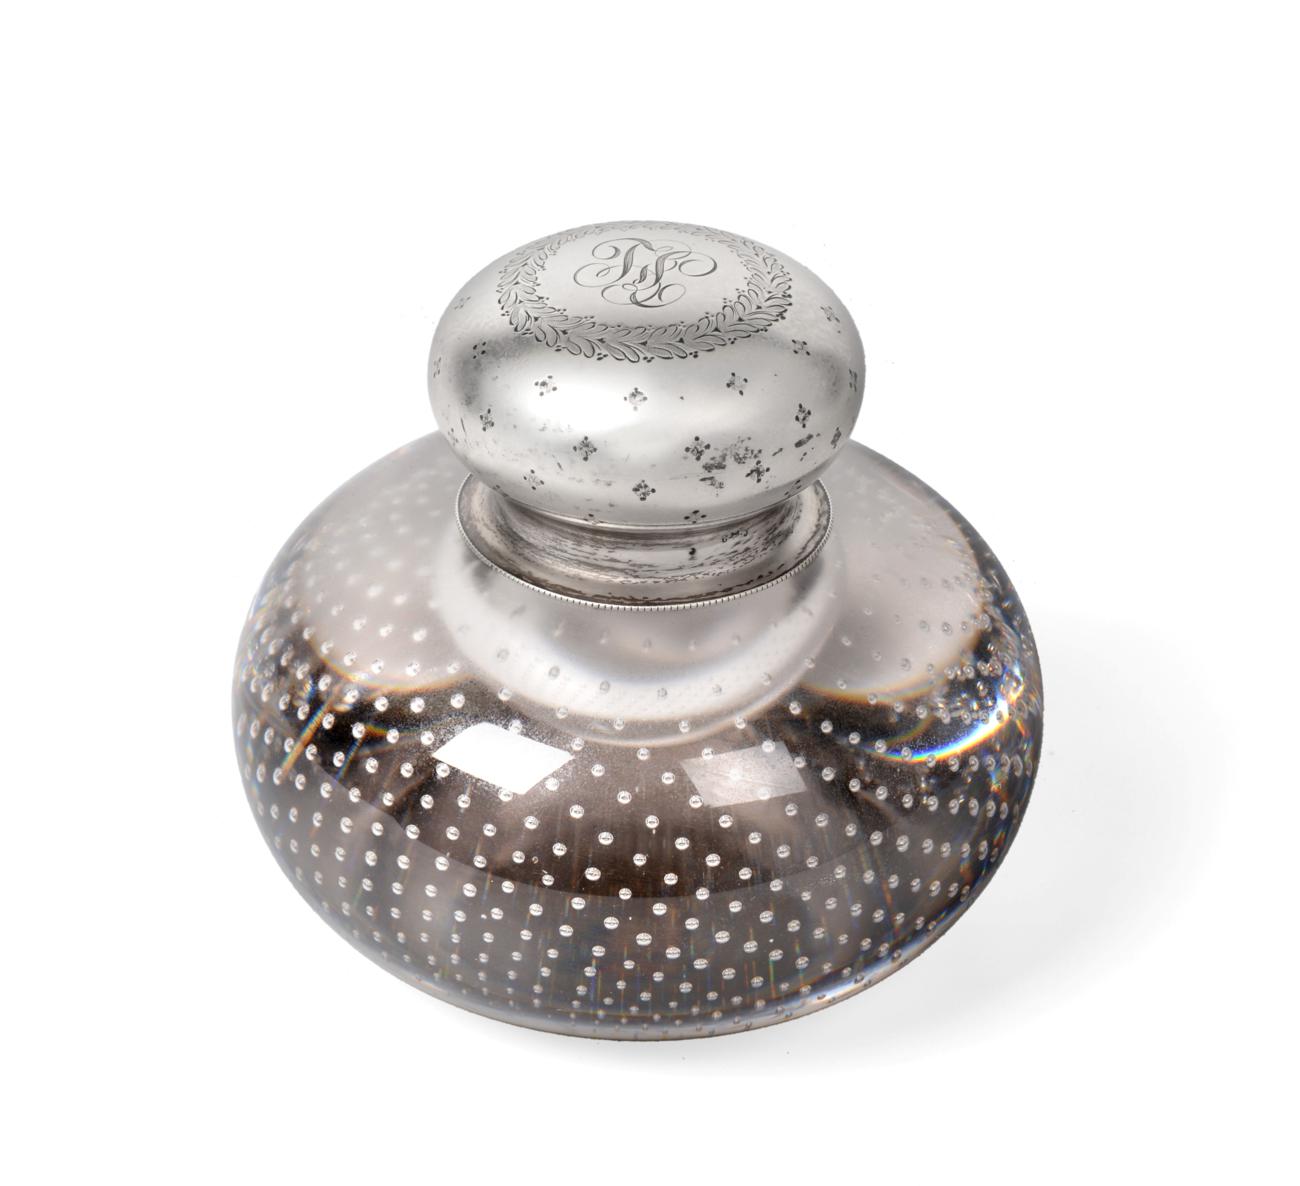 Lot 3105 - An American Silver-Mounted Glass Inkwell, by Goodnow and Jenks, Boston, Massachusetts, Circa...